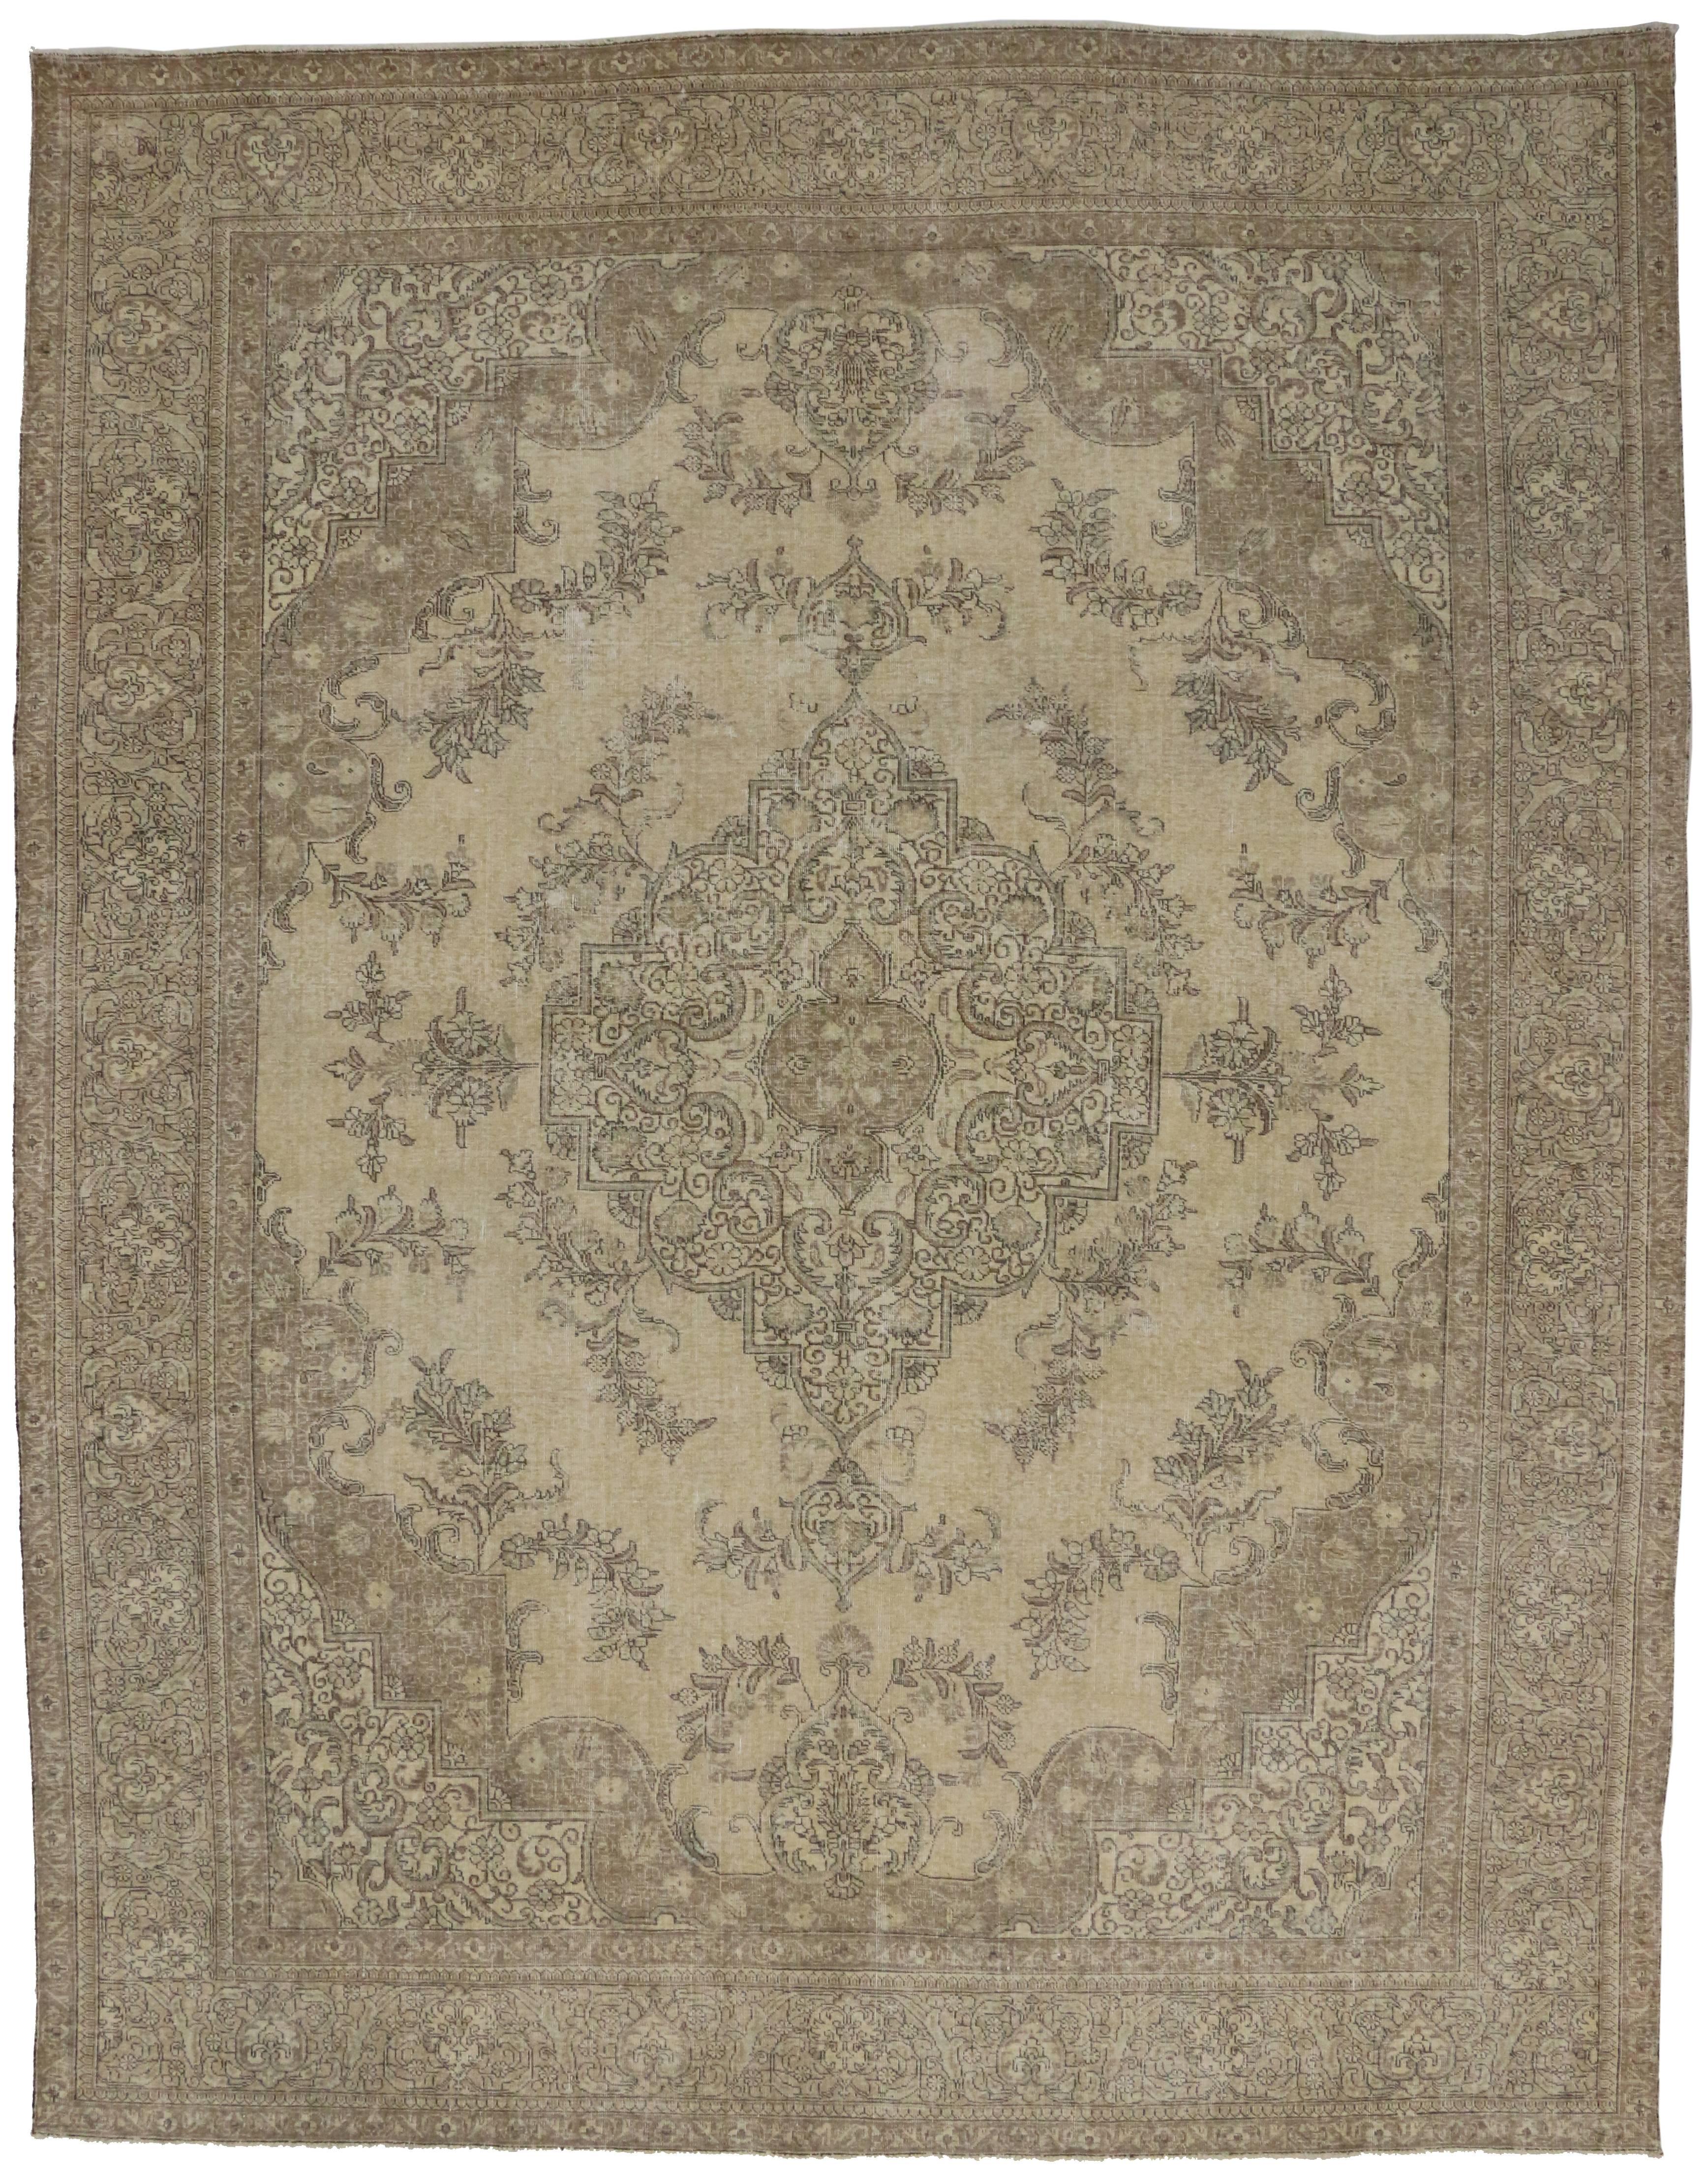 Hand-Knotted Distressed Vintage Persian Rug with Modern Refined French Industrial Style